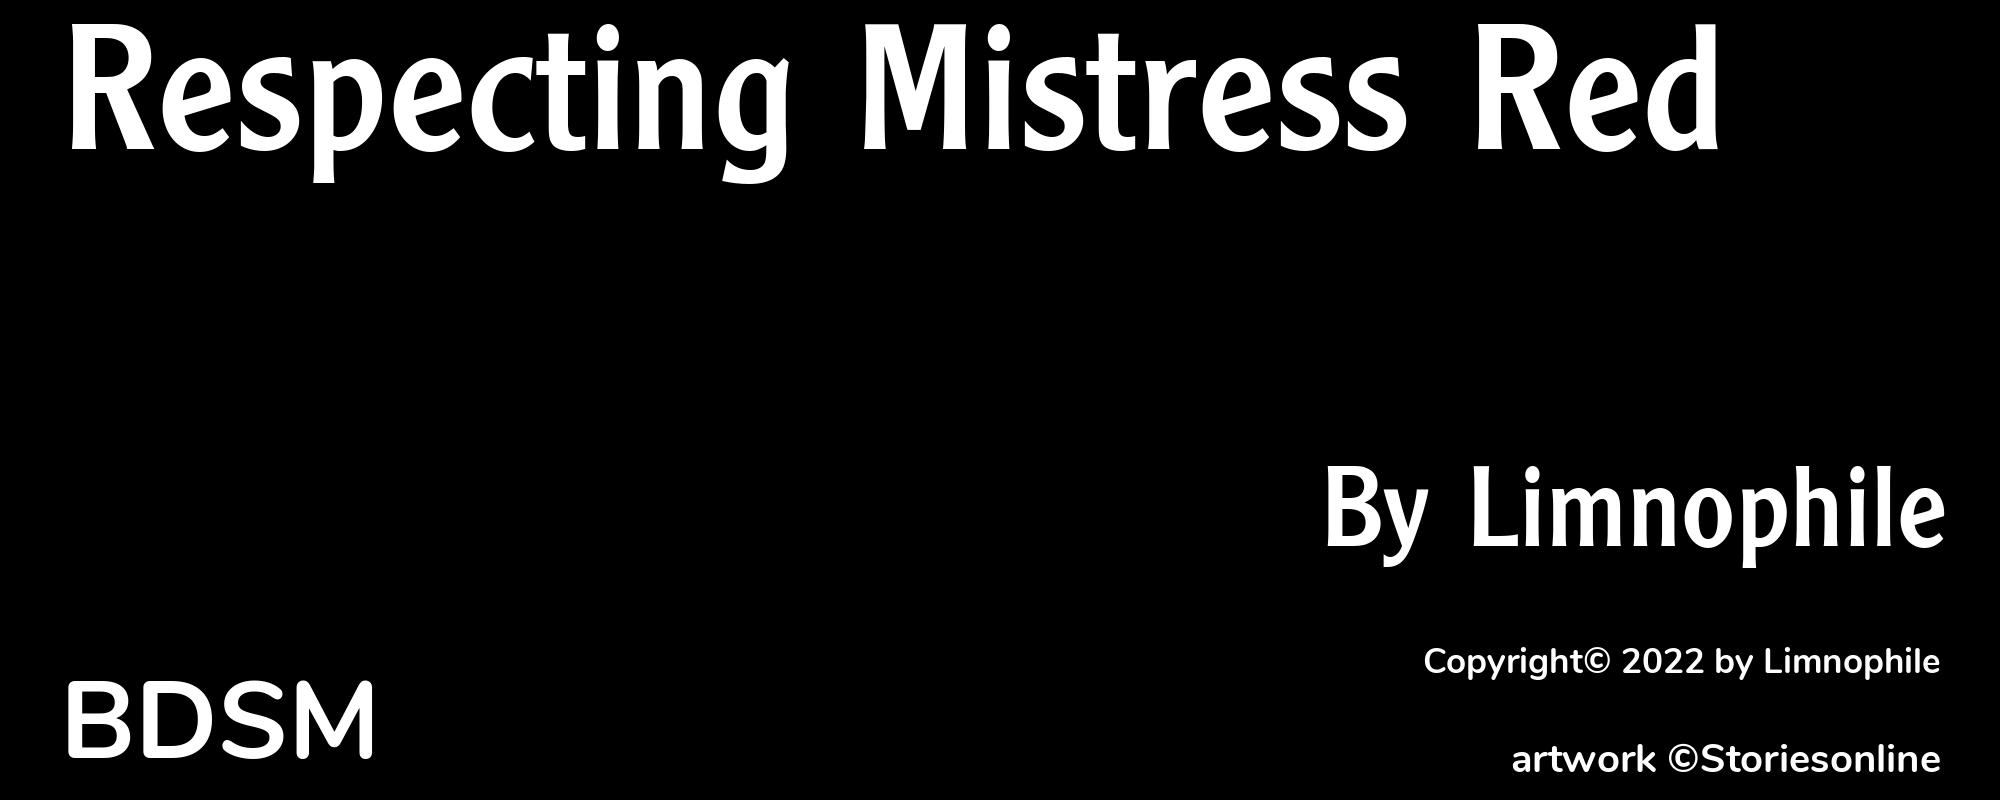 Respecting Mistress Red - Cover